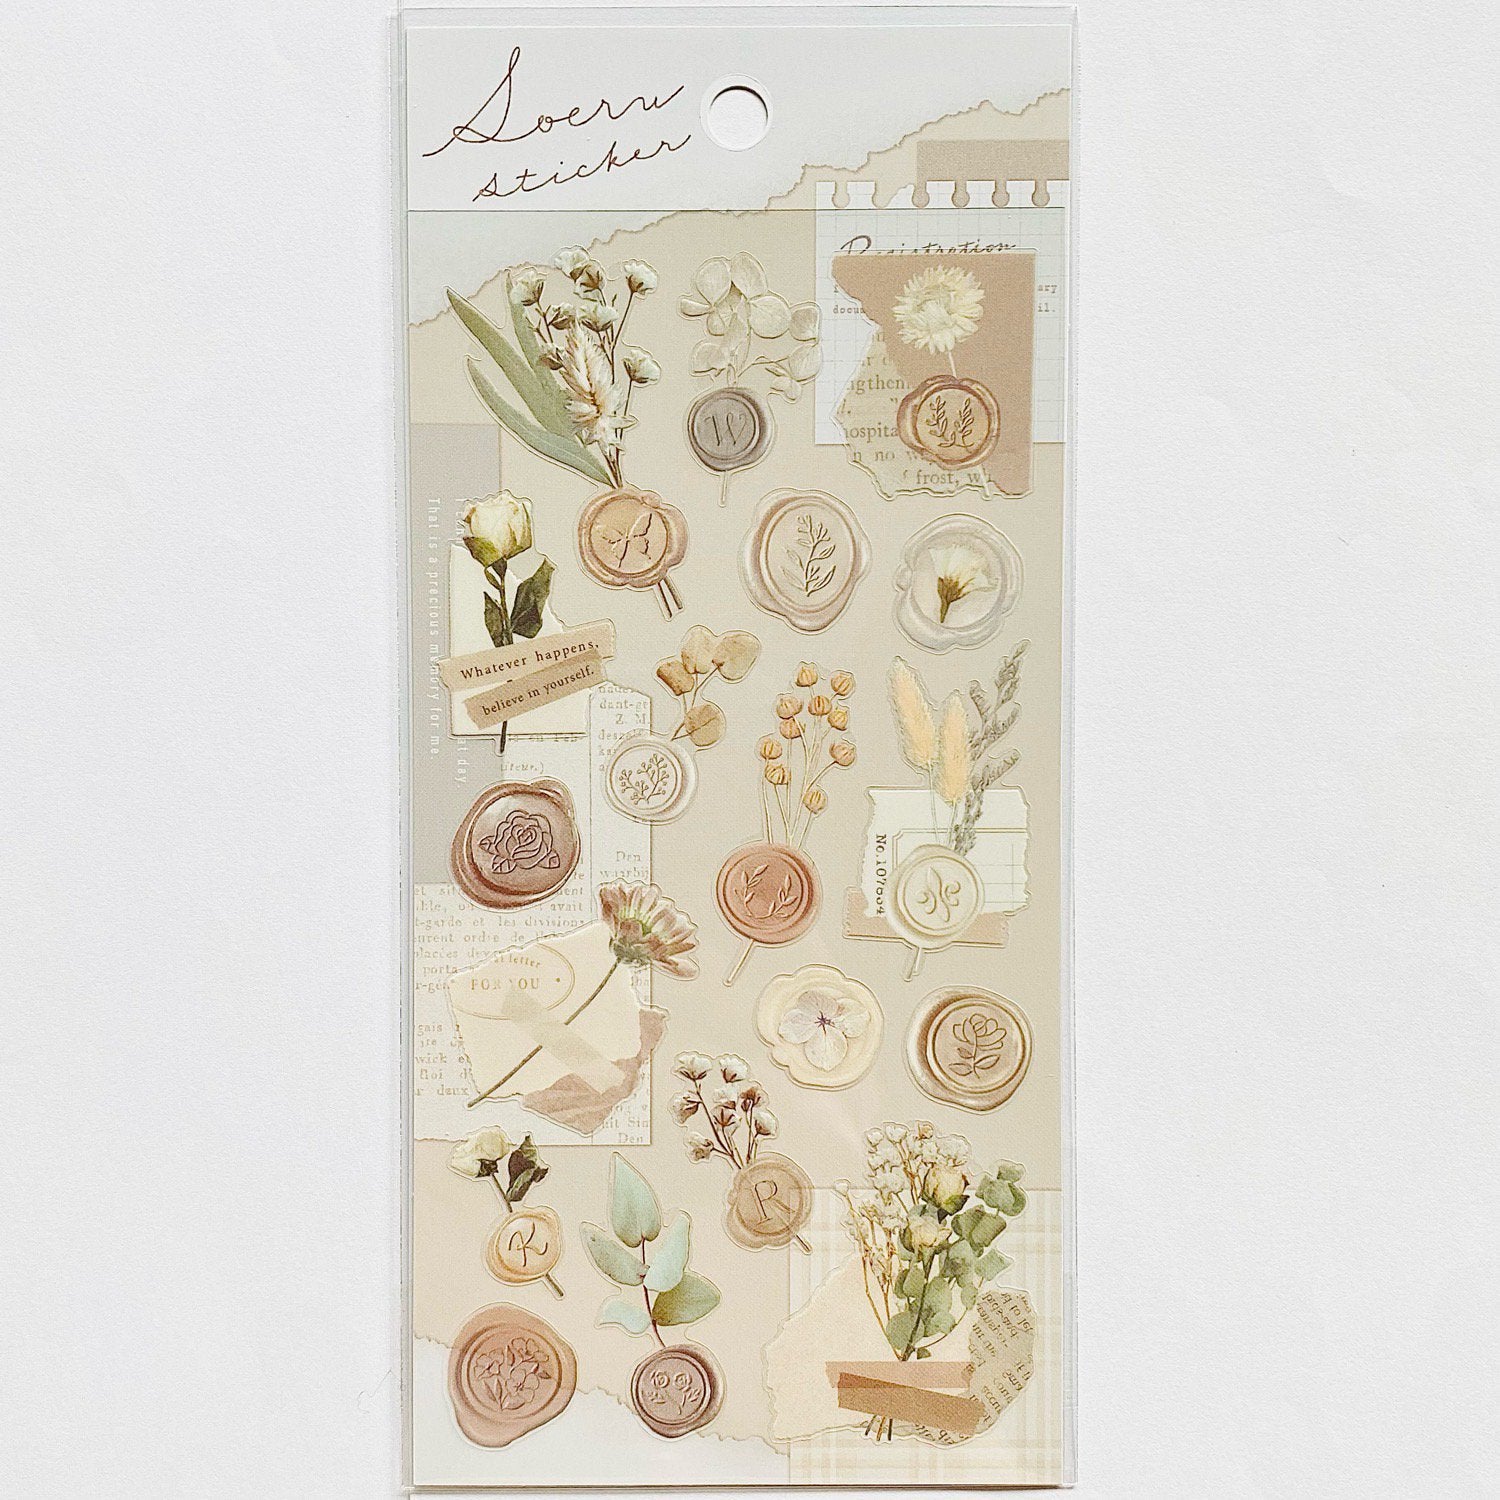 Soeru Sticker Sheet with Floral Wax Seal Pictures - Ivory